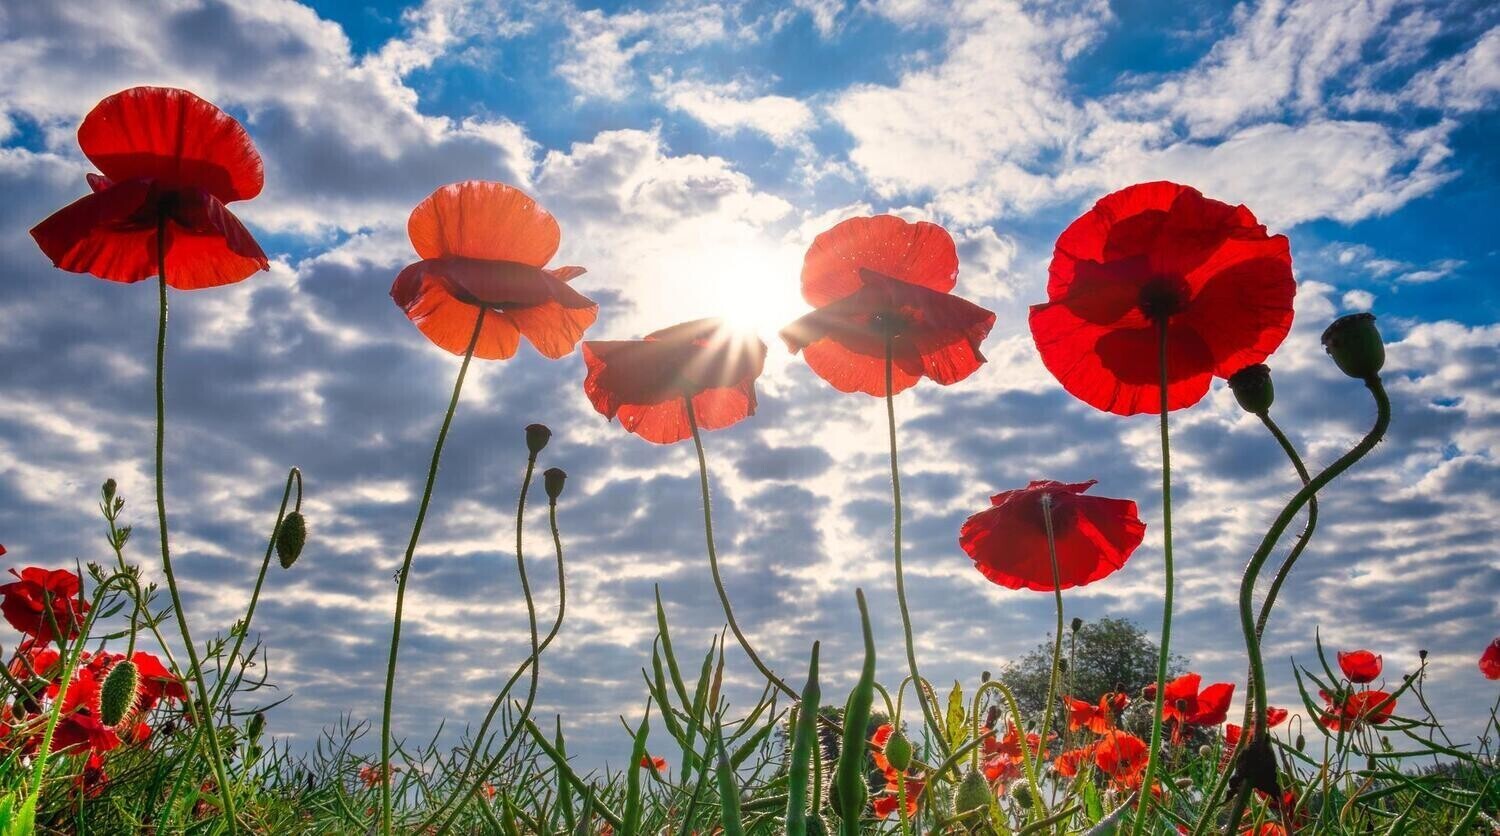 Poppy Field - Specially ordered for you. Delivery is approximately 4 - 6 weeks.